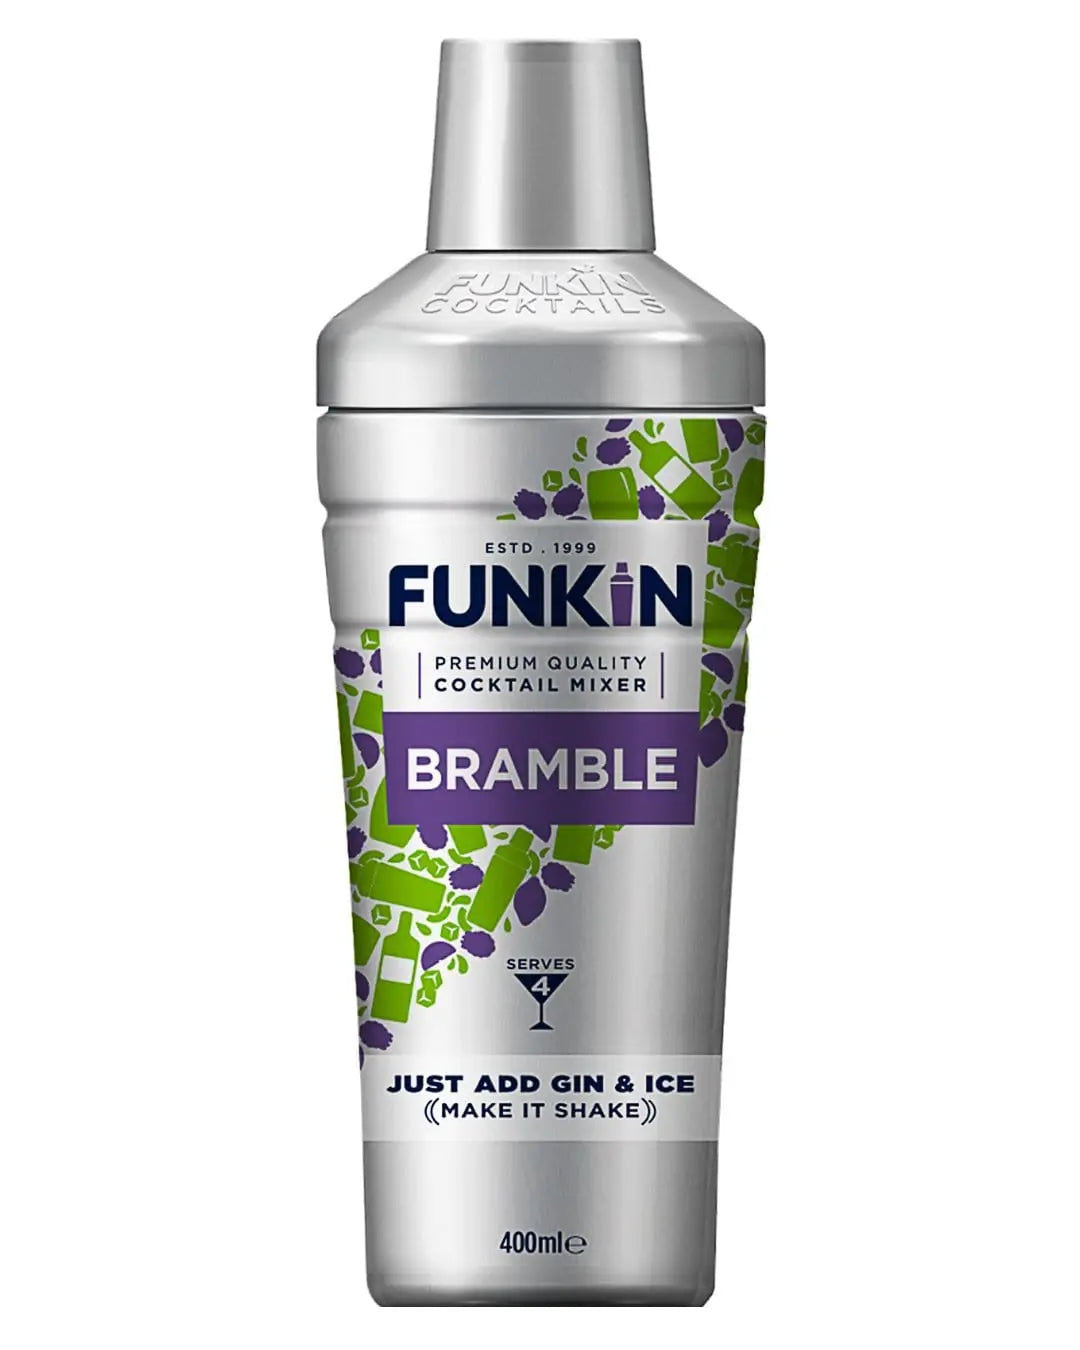 Funkin Bramble Cocktail Mixer Shaker, 400 ml Ready Made Cocktails 5060065301592